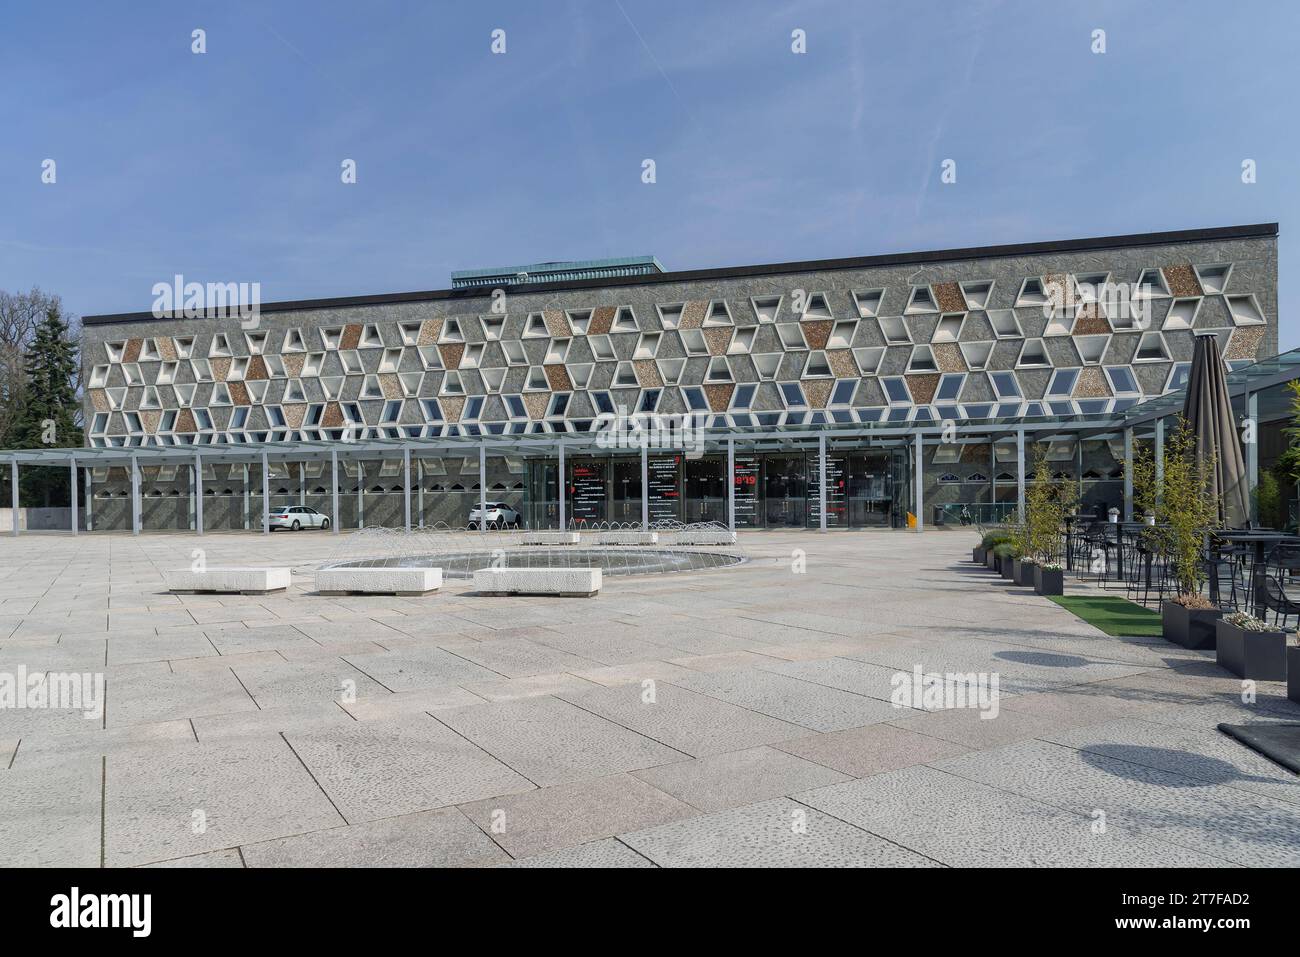 Luxembourg City, Luxembourg - Focus on the Grand Théâtre de Luxembourg build between 1959 and 1964 by Alain Bourbonnais. Stock Photo